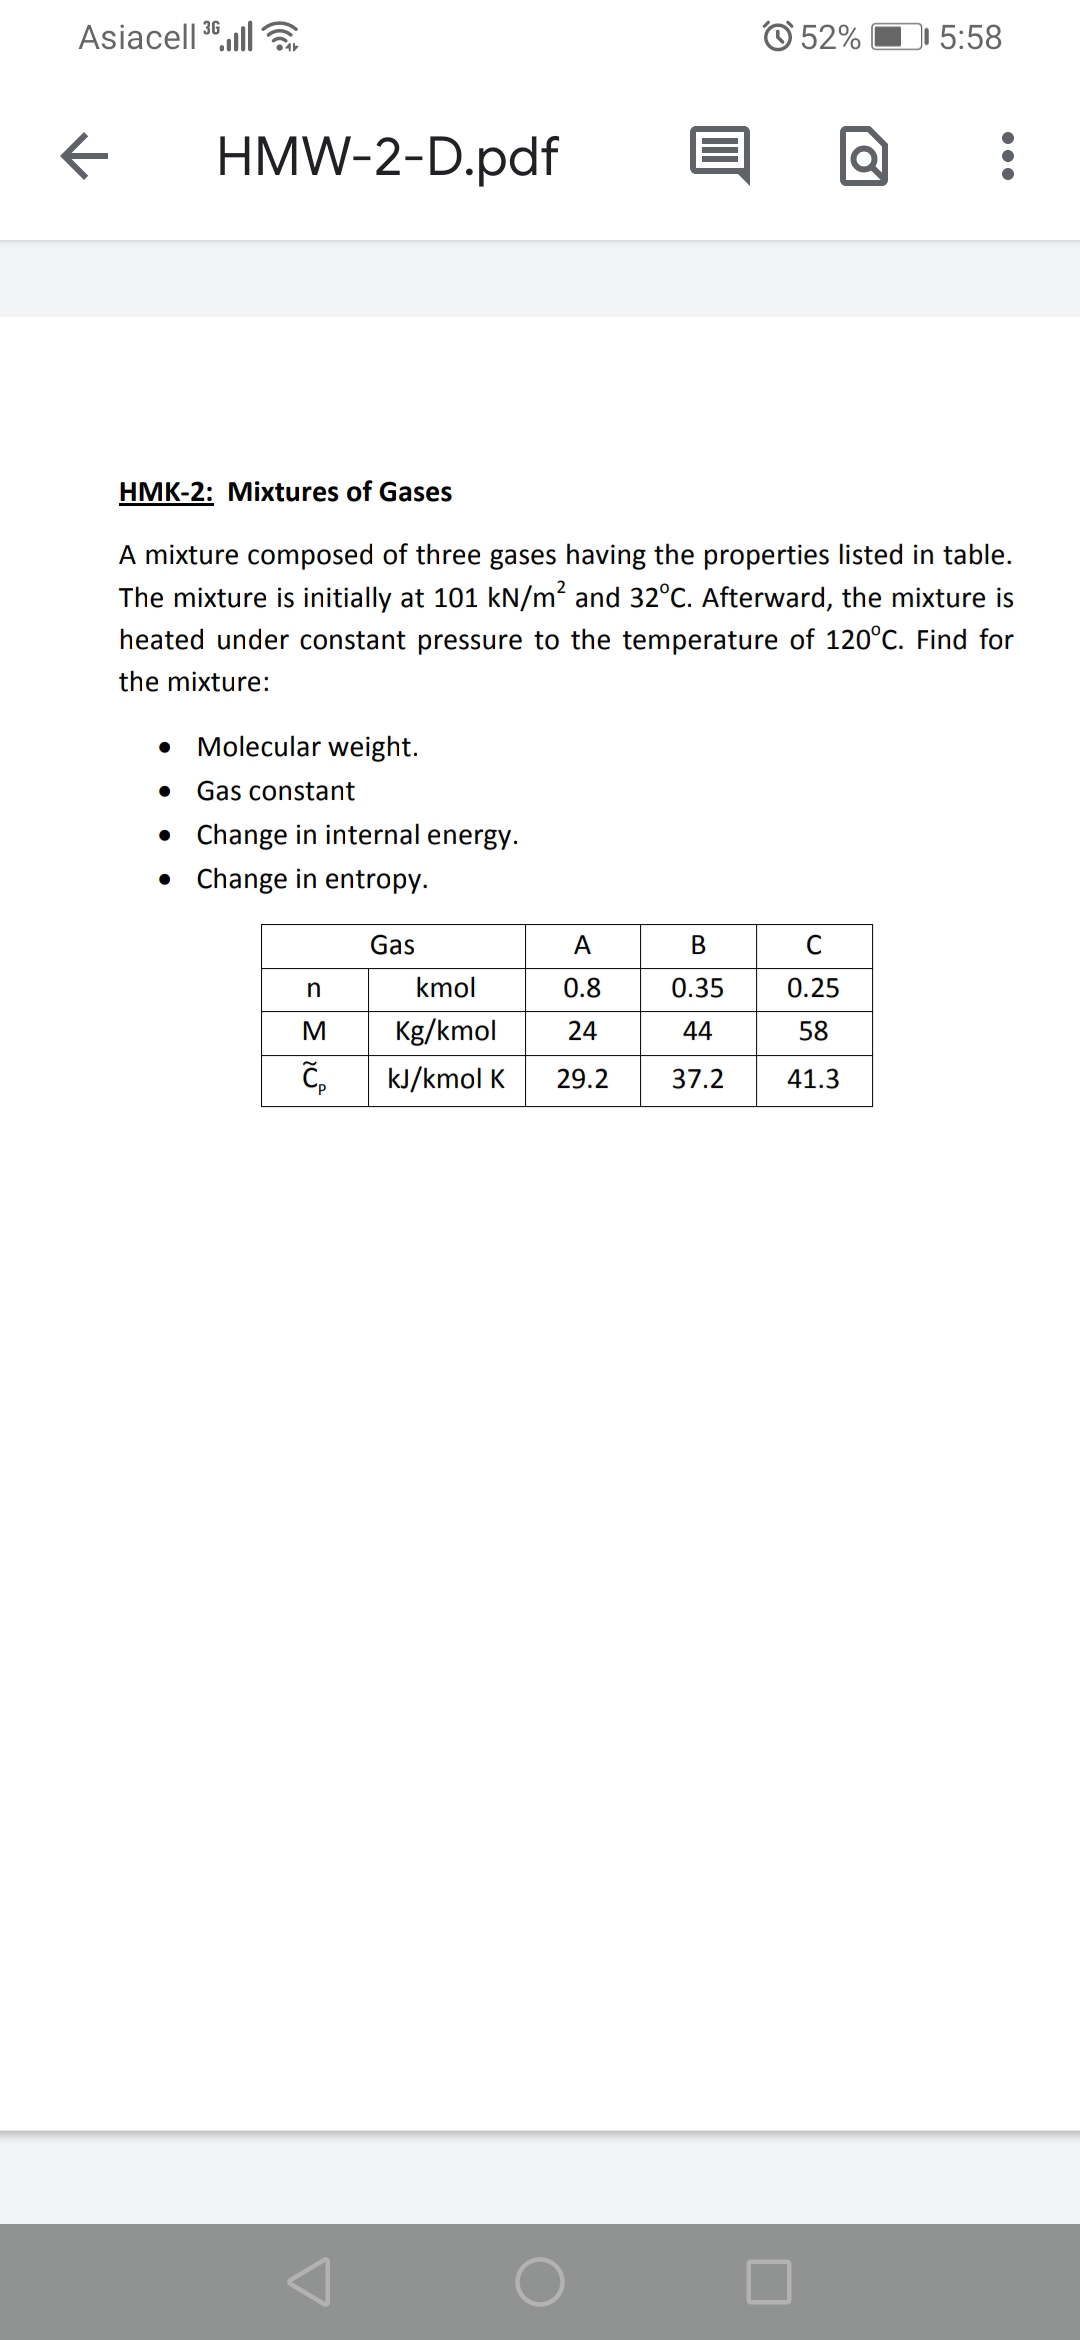 Asiacell 36,ll
O 52%
1 5:58
HMW-2-D.pdf
HMK-2: Mixtures of Gases
A mixture composed of three gases having the properties listed in table.
The mixture is initially at 101 kN/m? and 32°C. Afterward, the mixture is
heated under constant pressure to the temperature of 120°C. Find for
the mixture:
Molecular weight.
Gas constant
• Change in internal energy.
• Change in entropy.
Gas
A
В
C
kmol
0.8
0.35
0.25
M
Kg/kmol
24
44
58
kJ/kmol K
29.2
37.2
41.3
